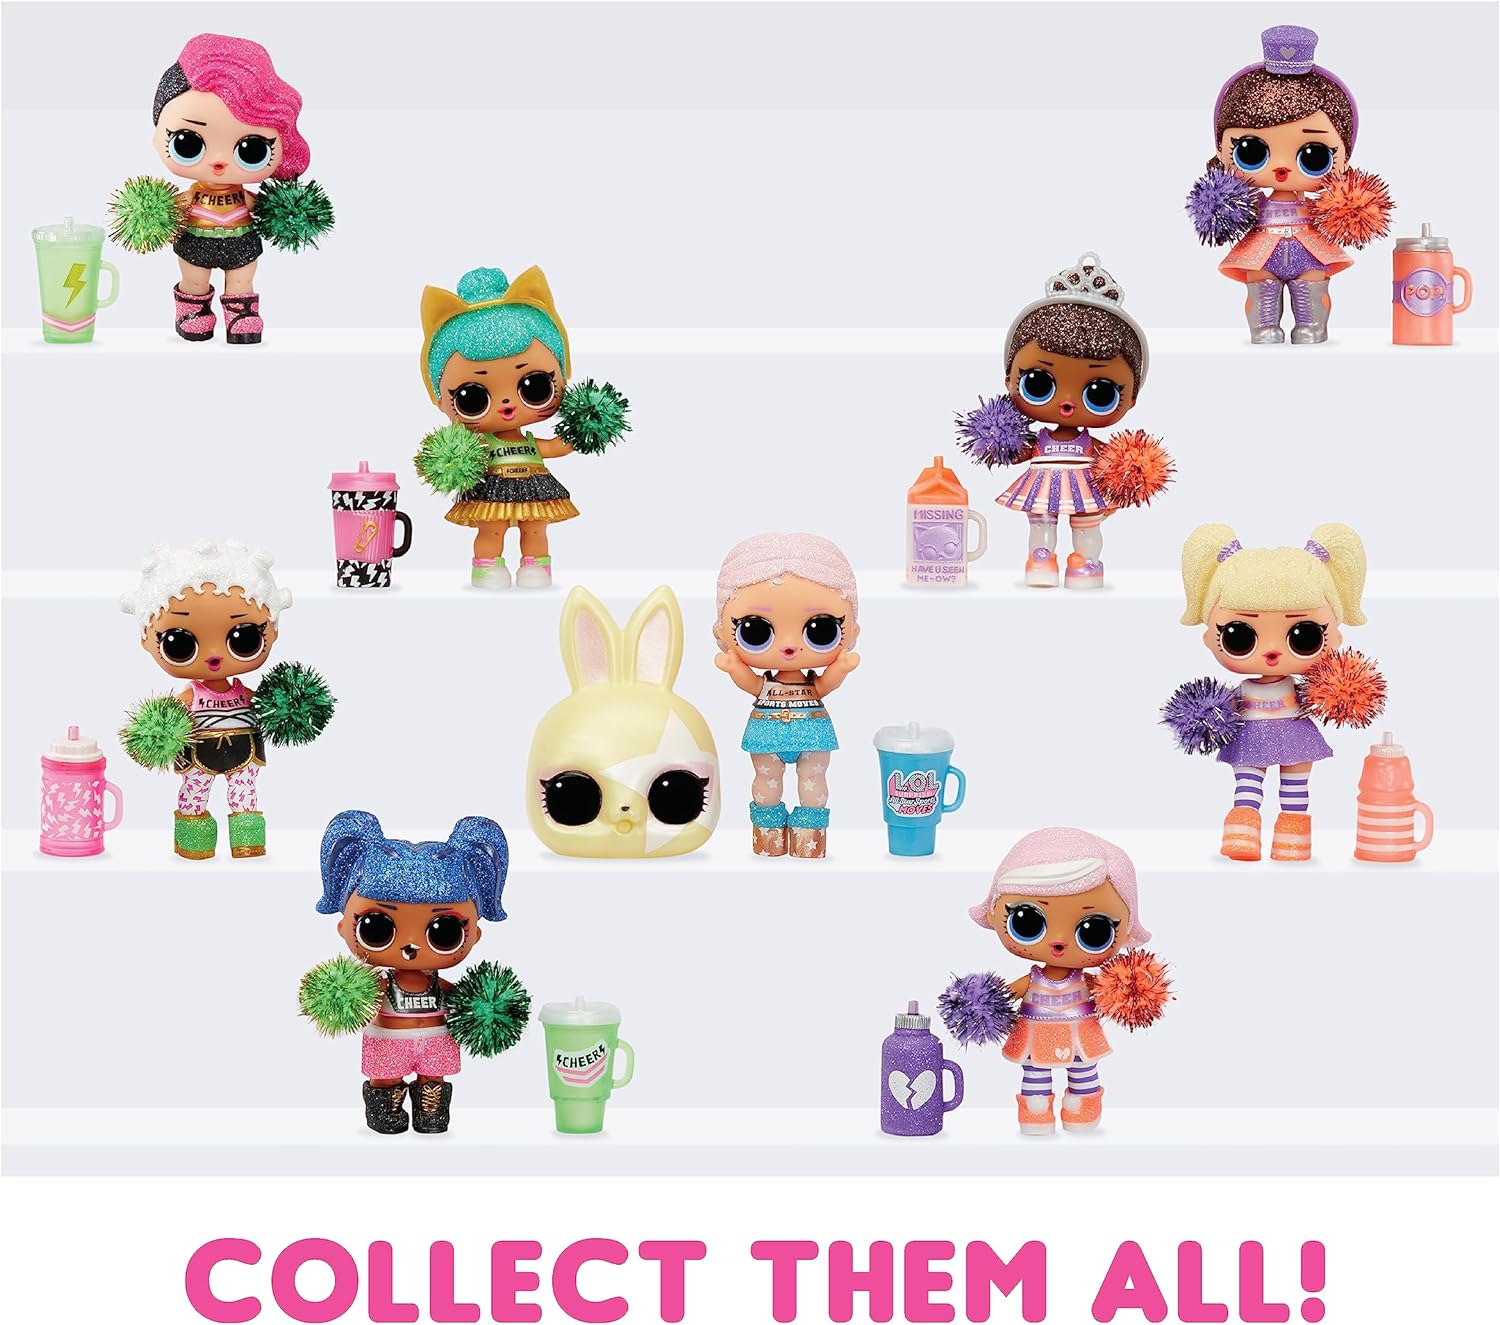 L.O.L. Surprise! All Star Sports Moves - Cheer- Surprise Doll, Theme, Cheerleading Dolls, Mix and Match Outfits, Shoes, Accessories, Limited Edition Collectible Doll Gift Girls Age 4+